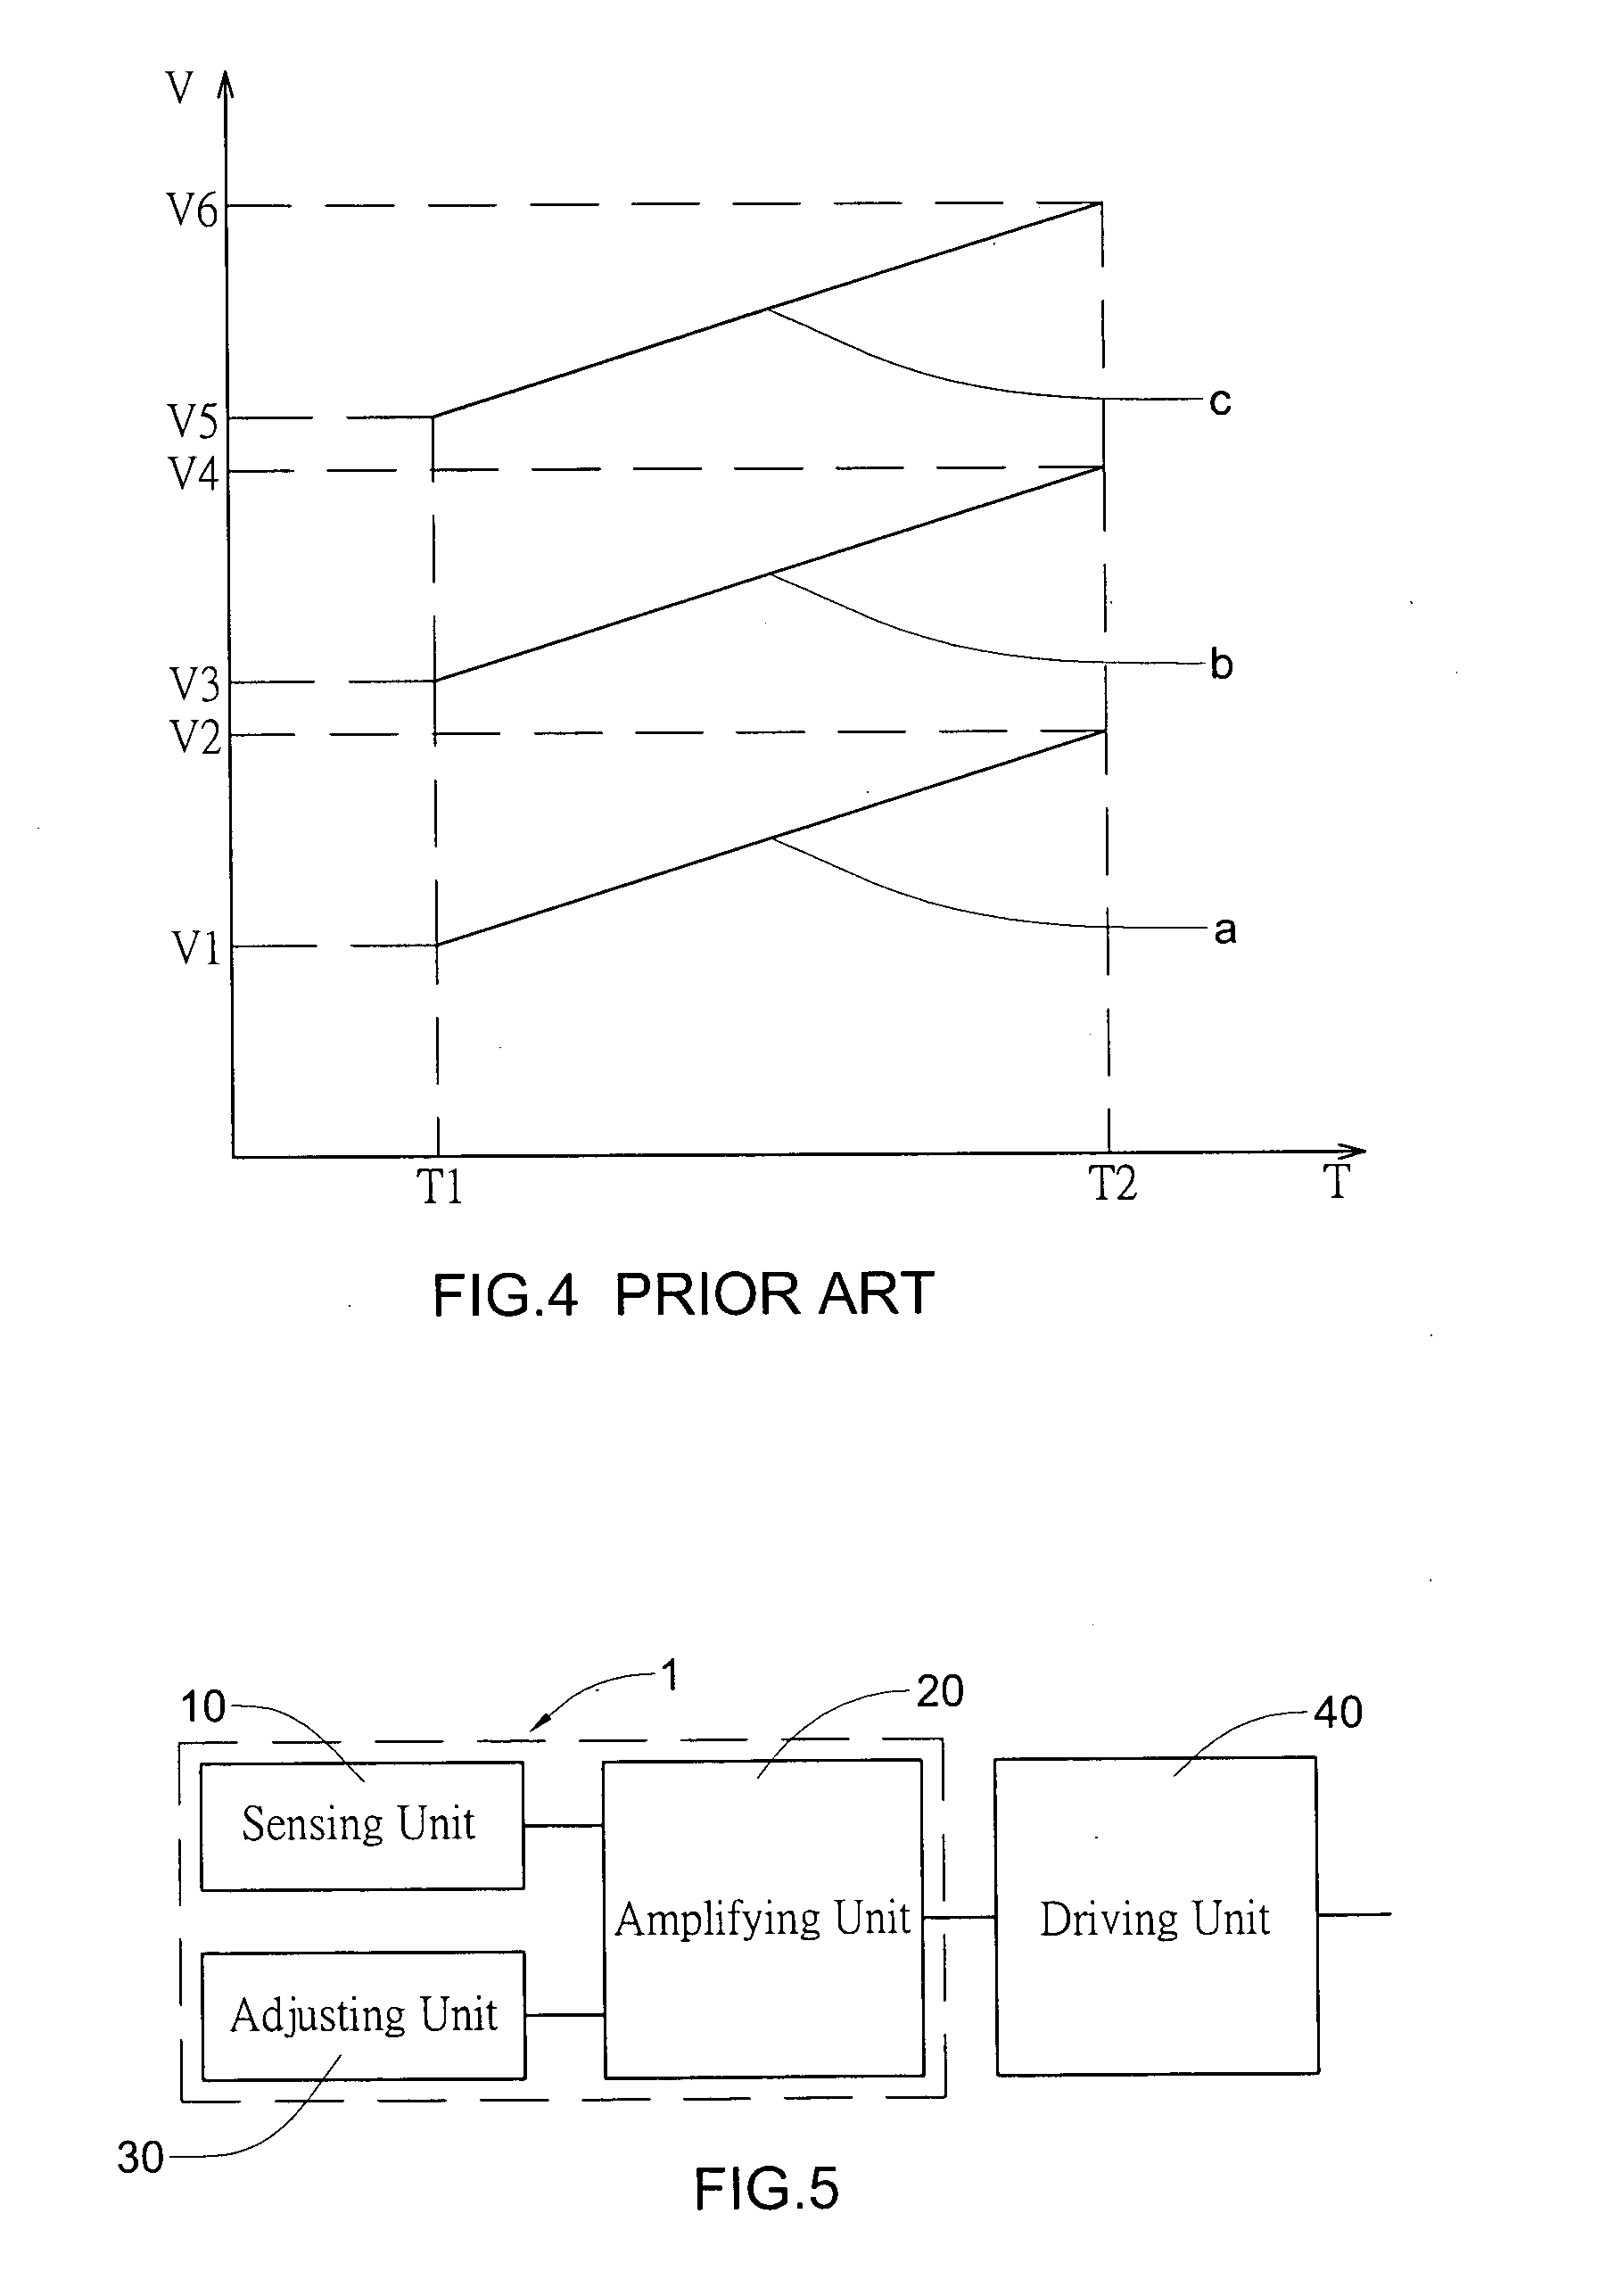 Circuit structure capable of adjusting gradient of output to temperature variation